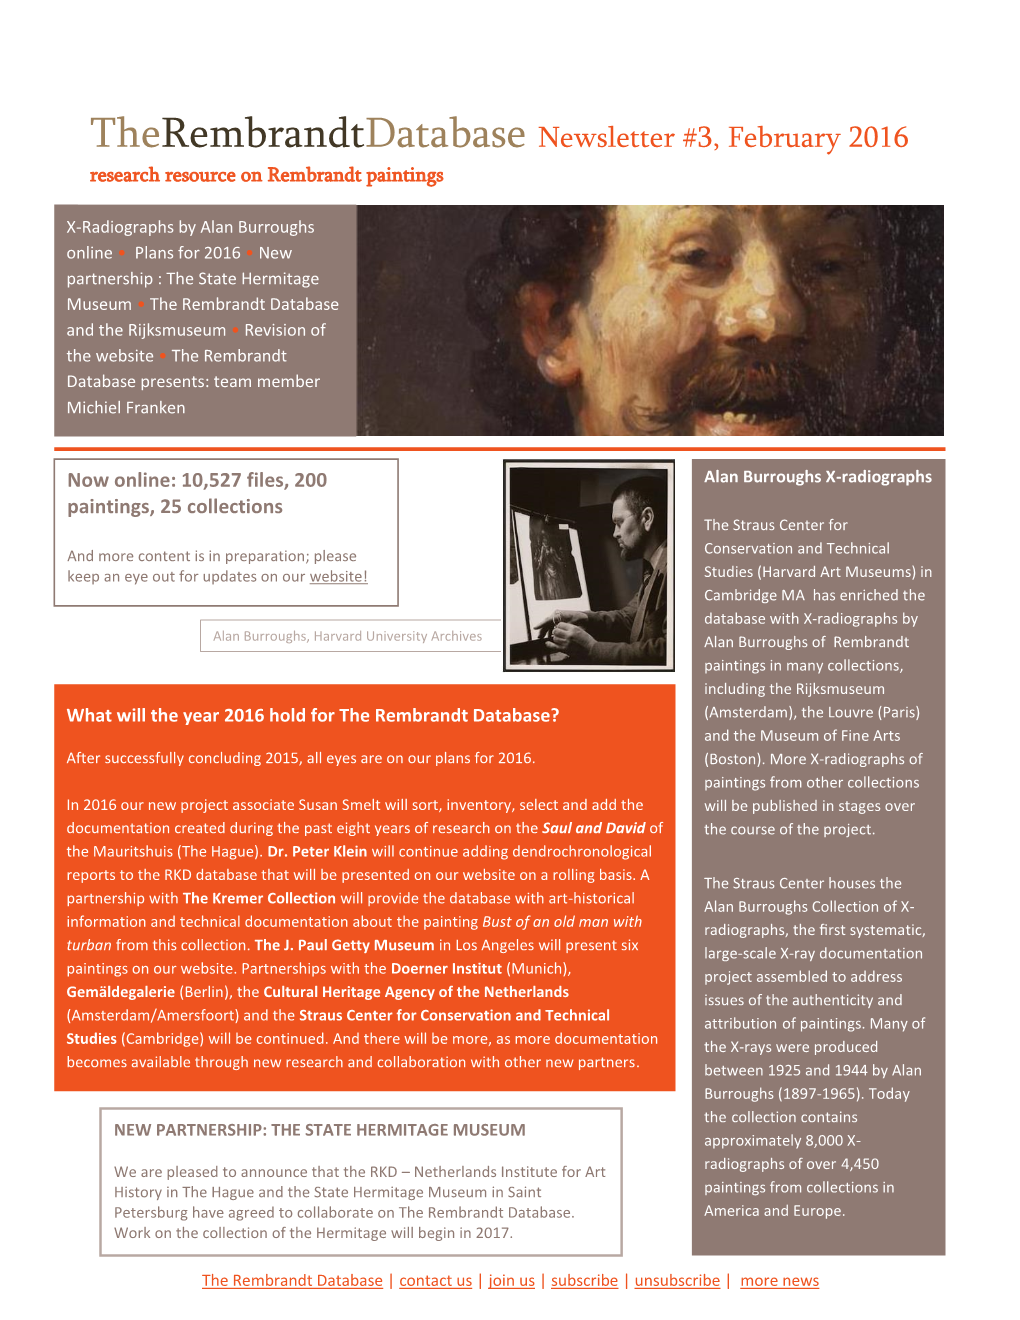 Therembrandtdatabase Newsletter #3, February 2016 Research Resource on Rembrandt Paintings